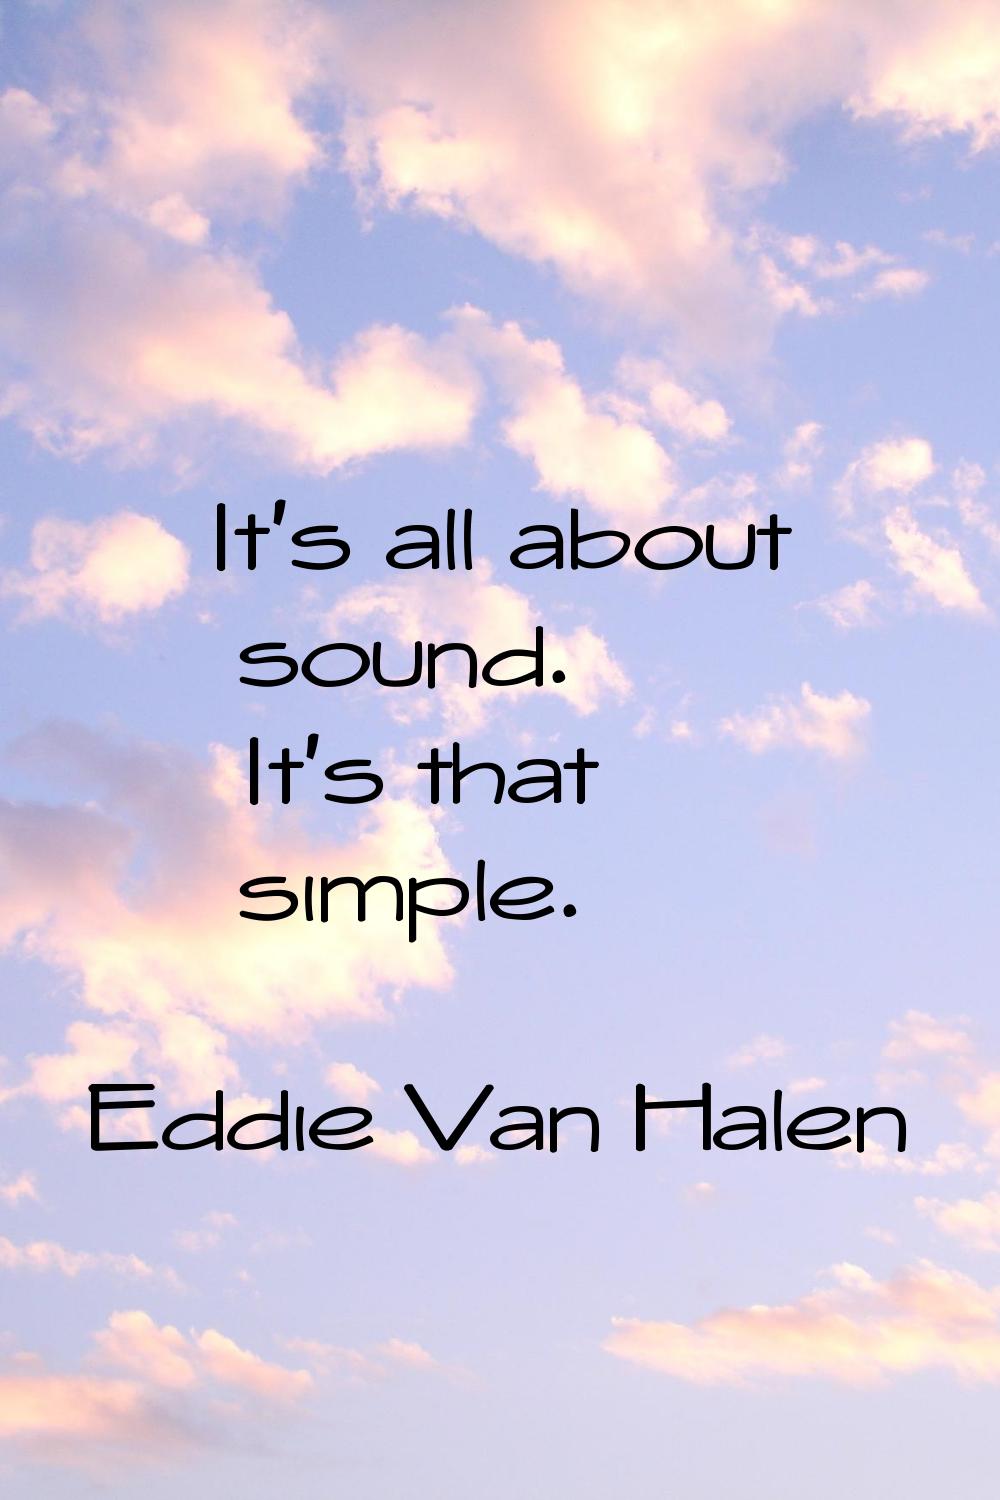 It's all about sound. It's that simple.